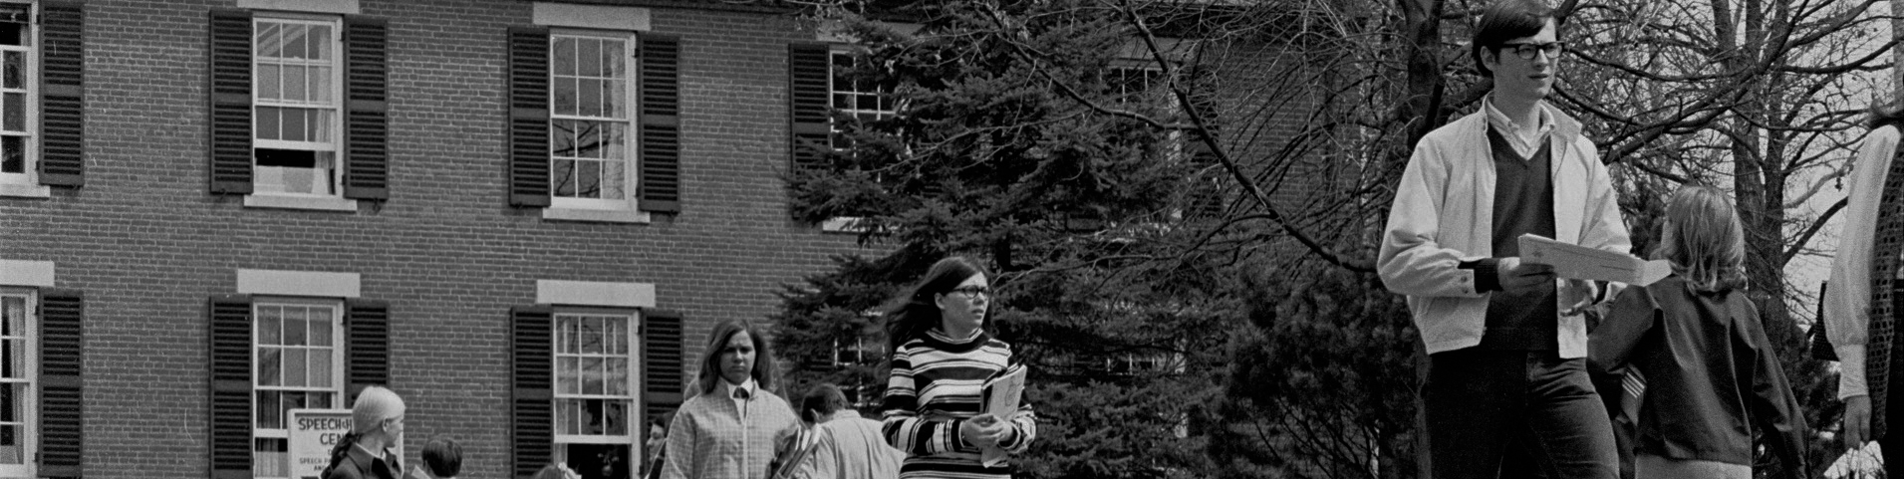 students walking on campus, in 1970's